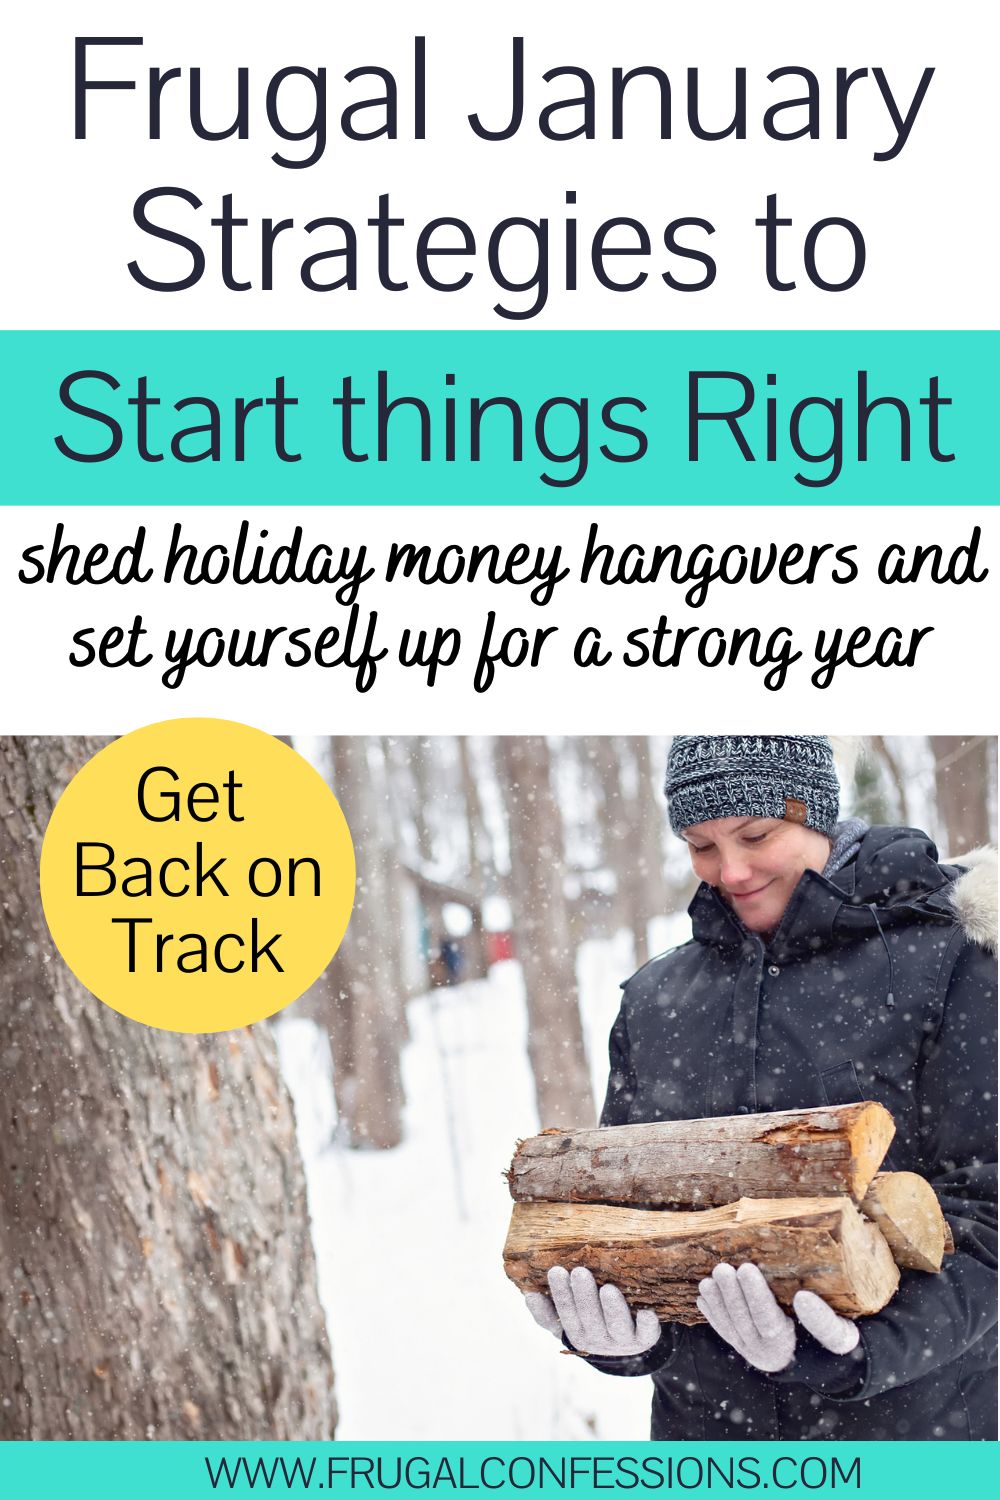 woman smiling, carrying armful of wood in snow, text overlay "Frugal January Strategies"